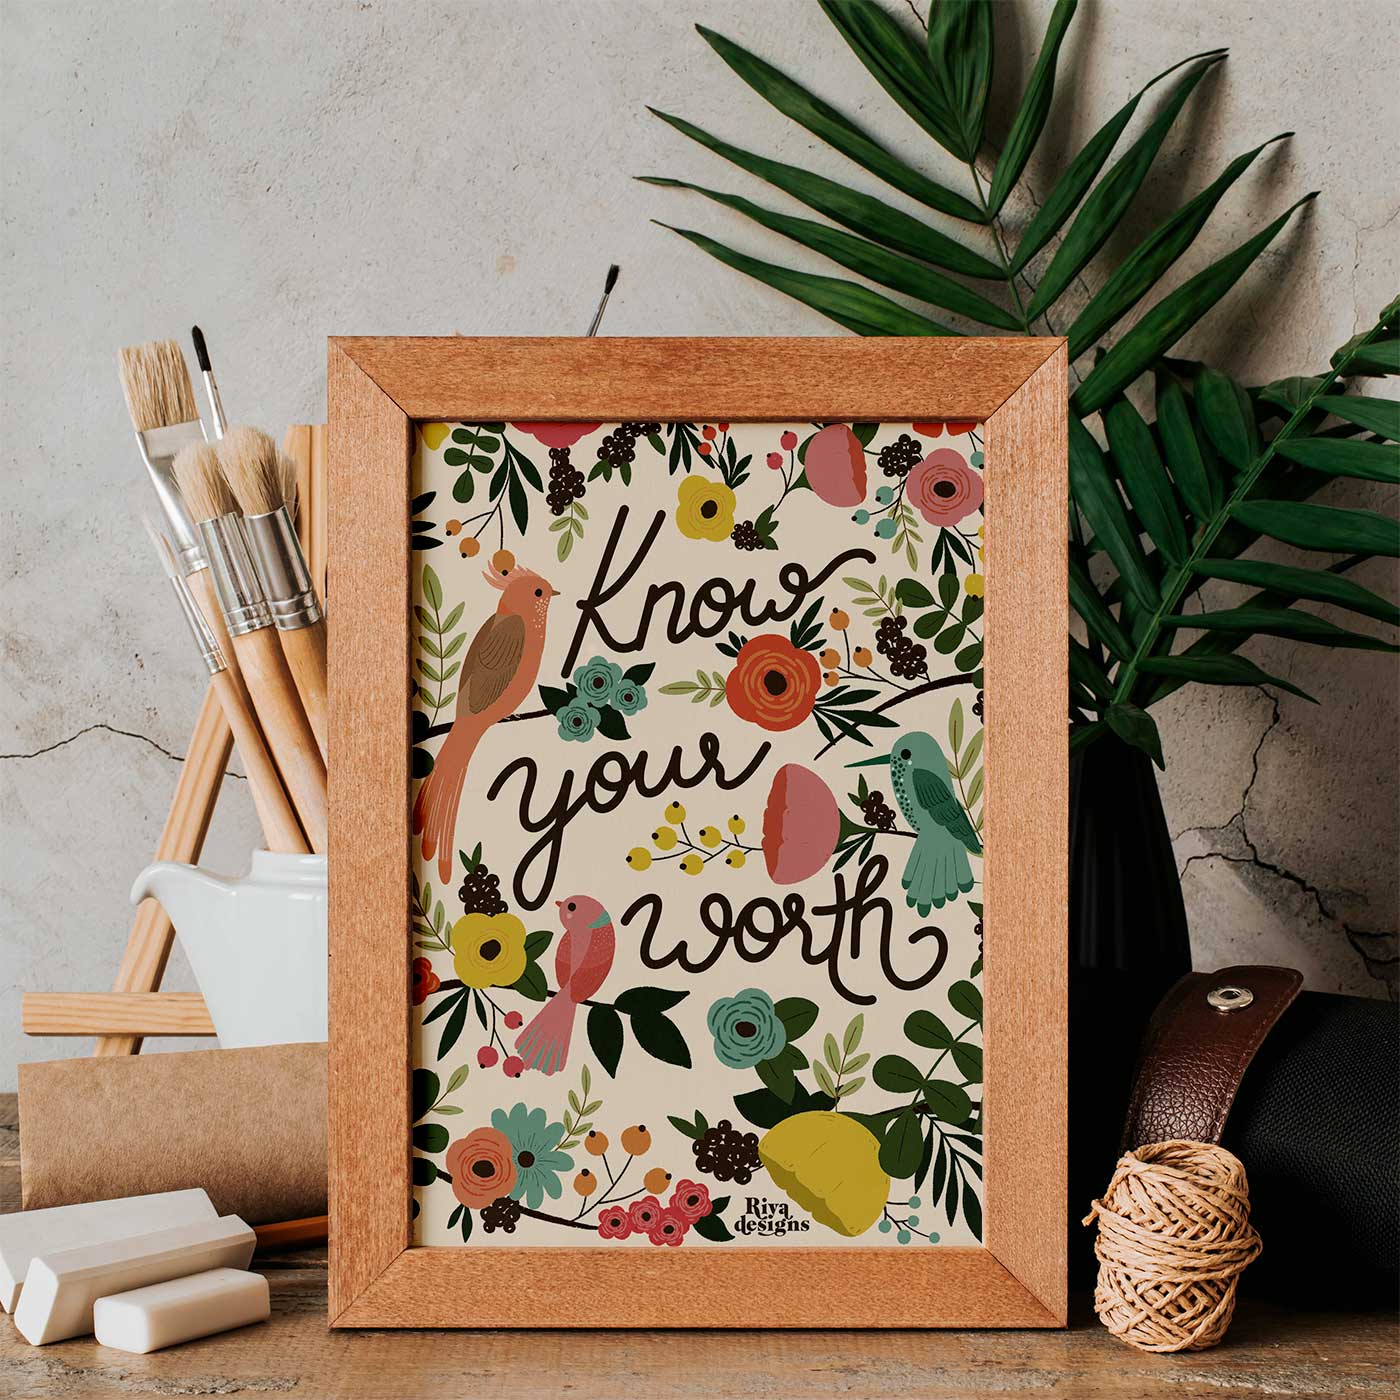 Know Your Worth Art Print